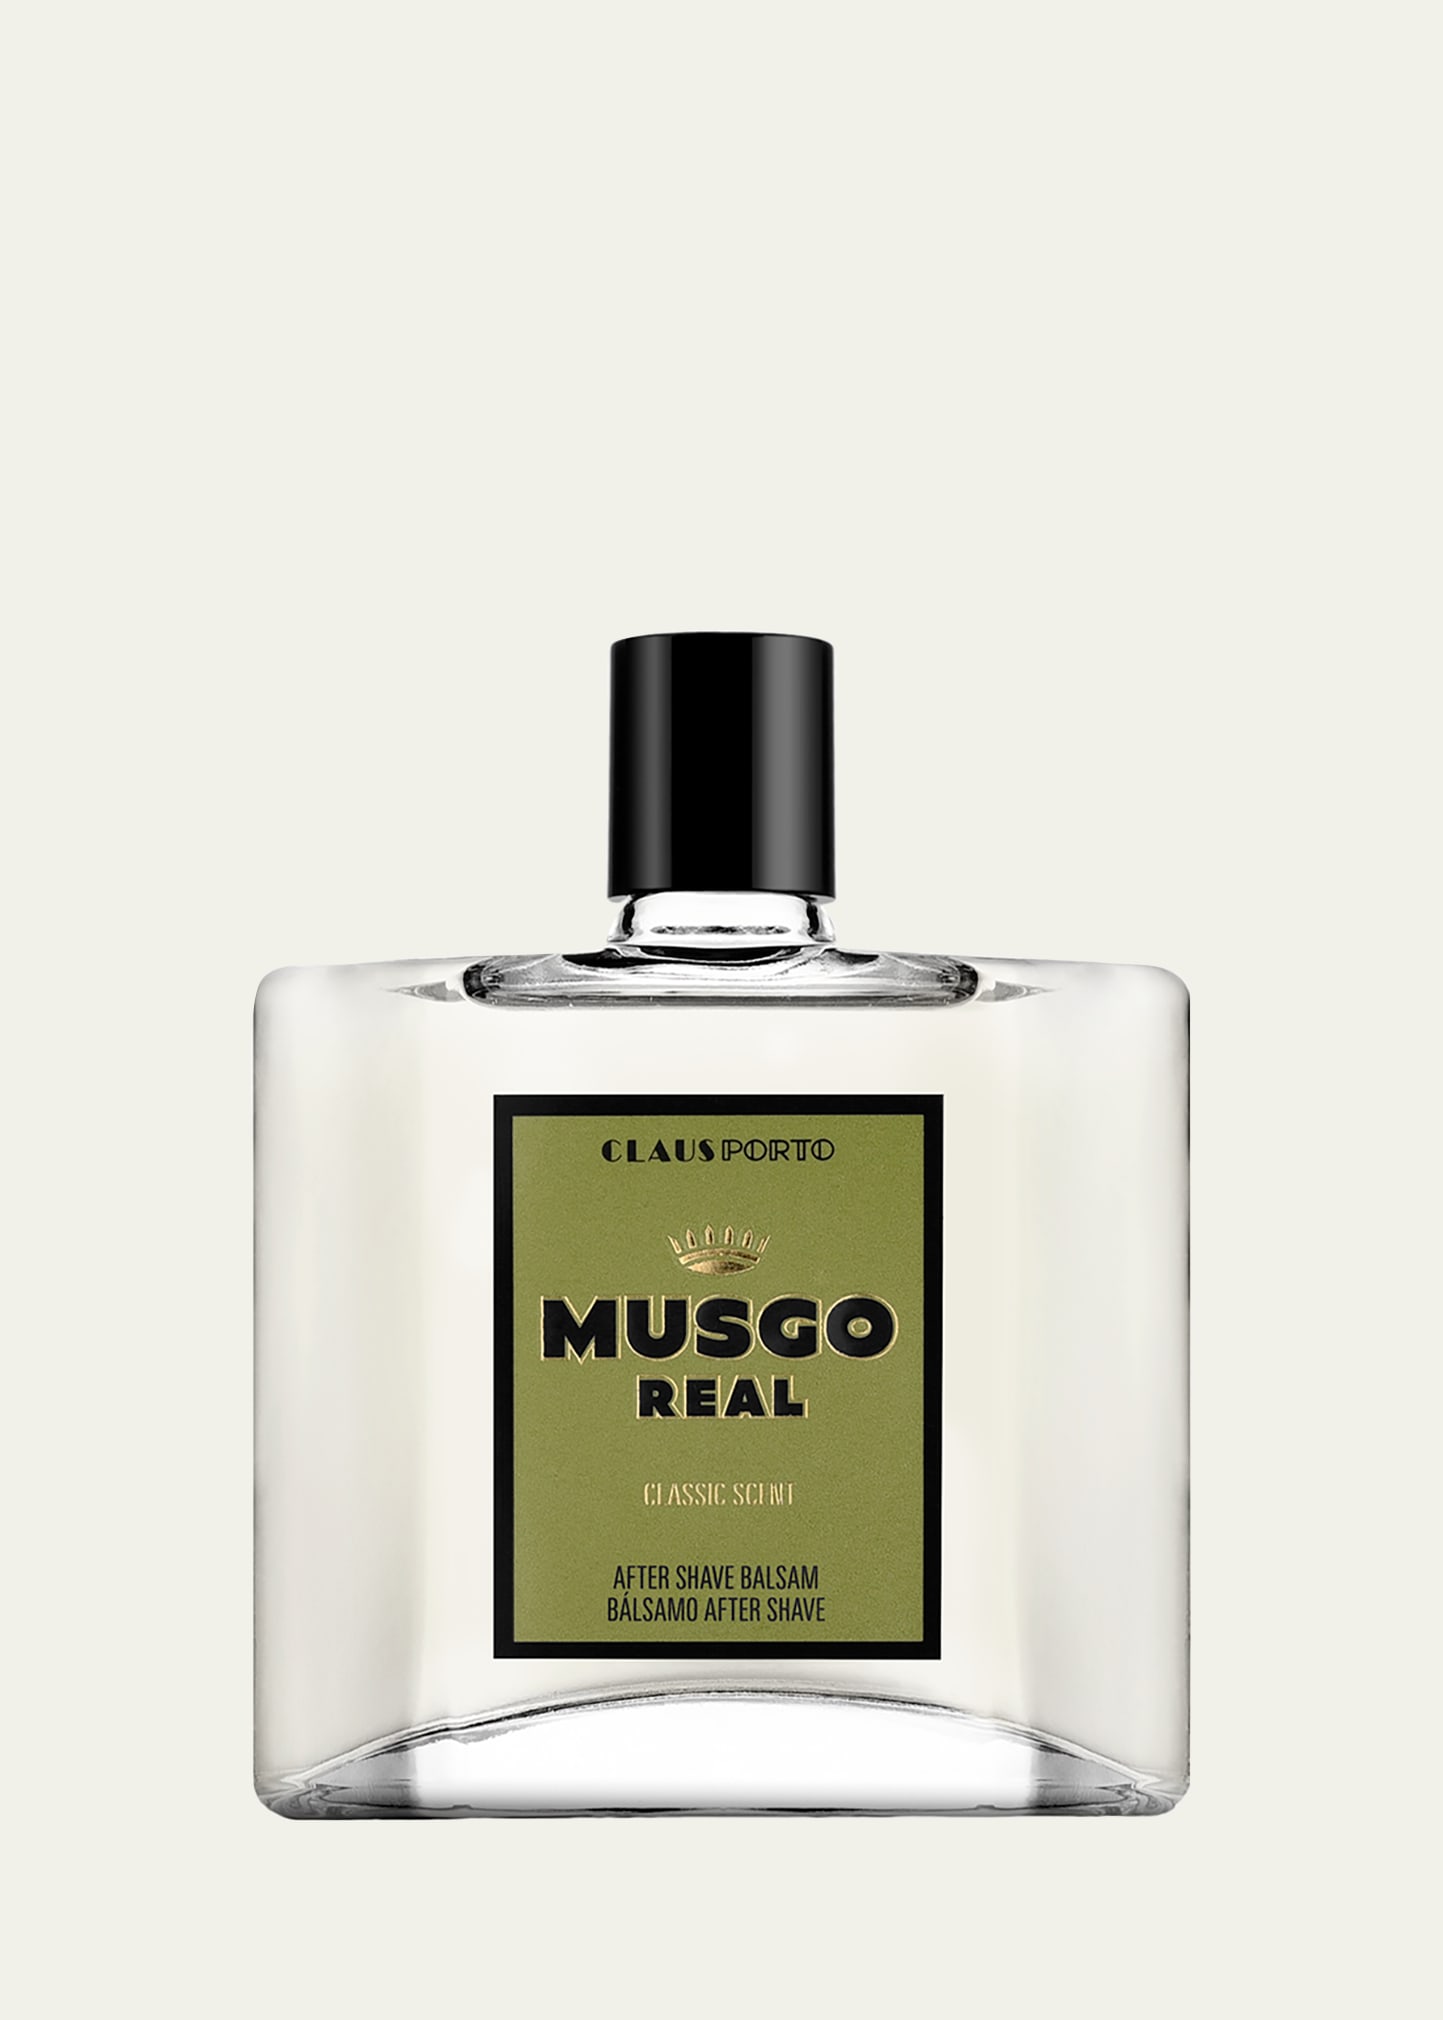 Musgo Real Classic Scent After Shave Balsam, 3.4 Oz./ 100 ml